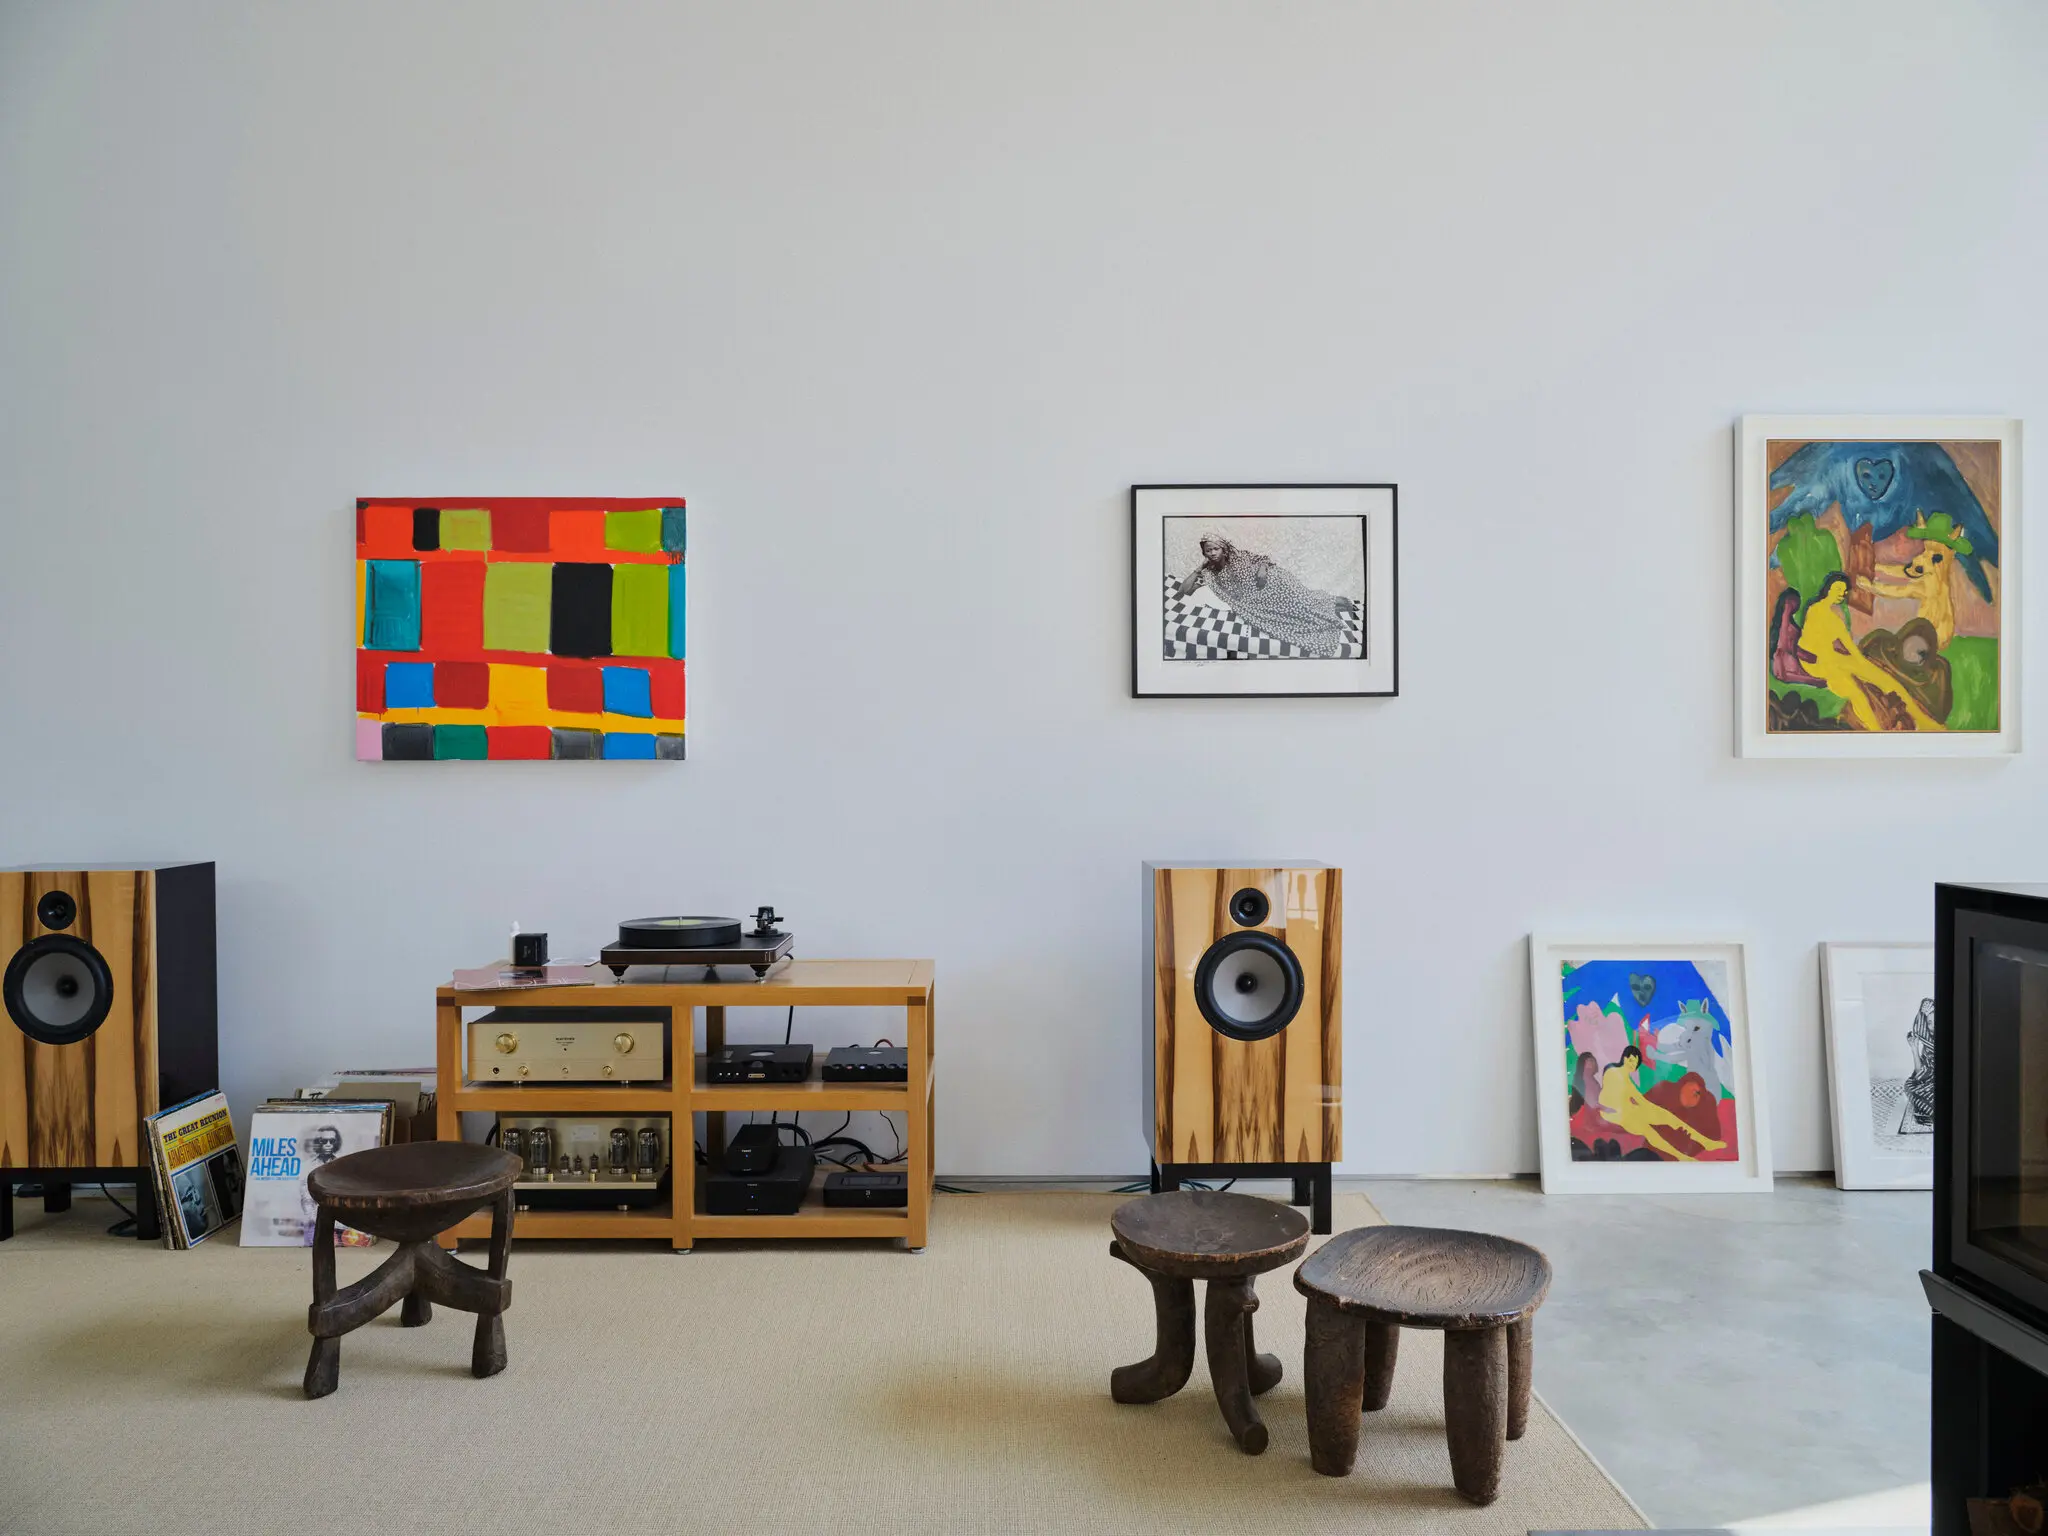 The living area features a custom stereo and artworks.